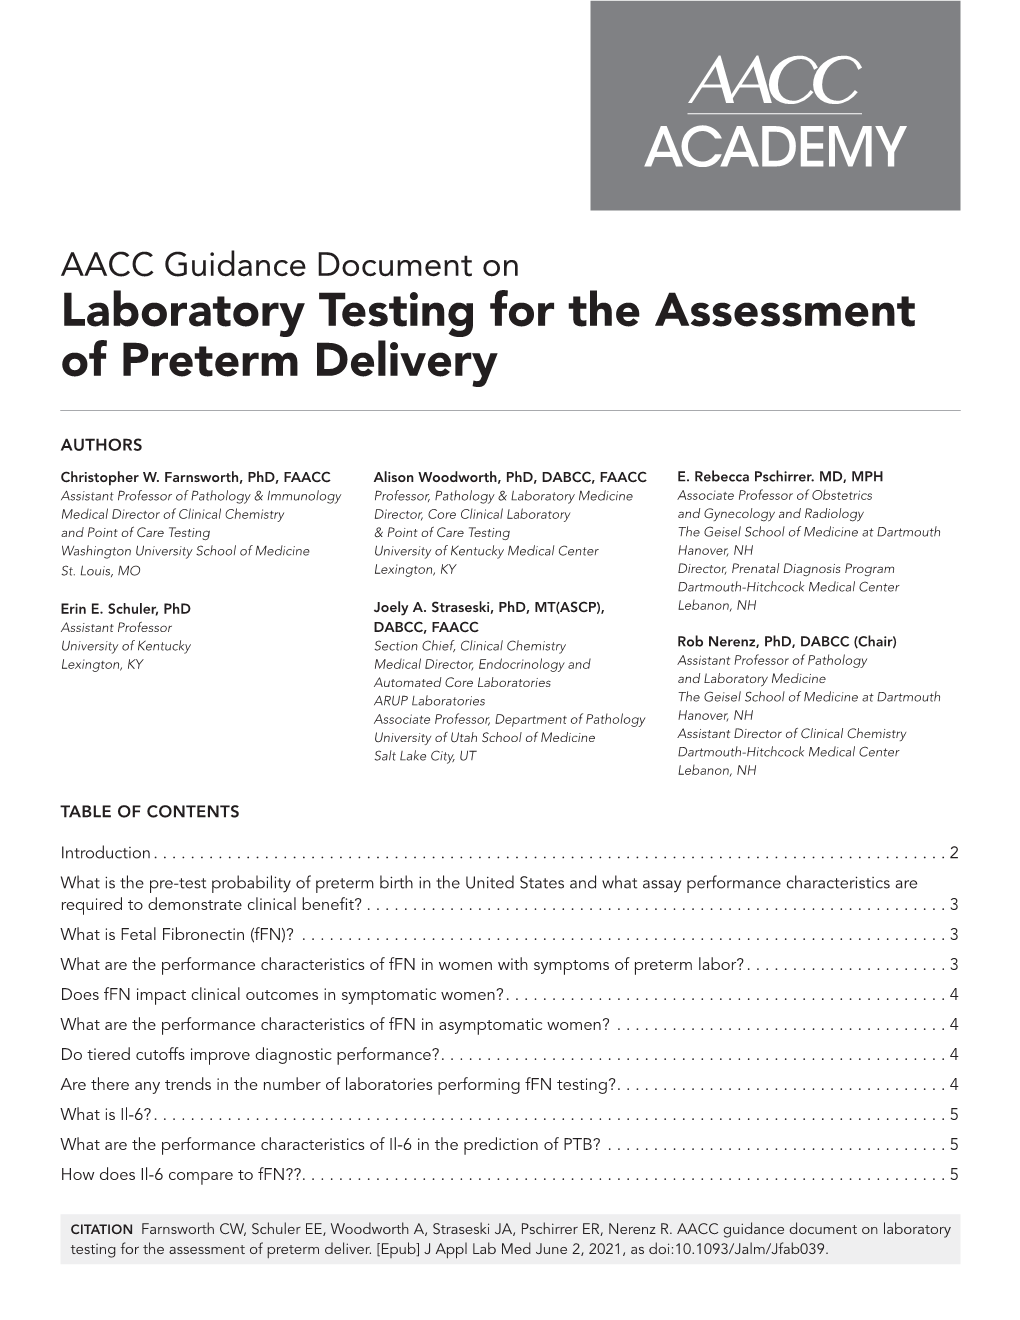 Laboratory Testing for the Assessment of Preterm Delivery